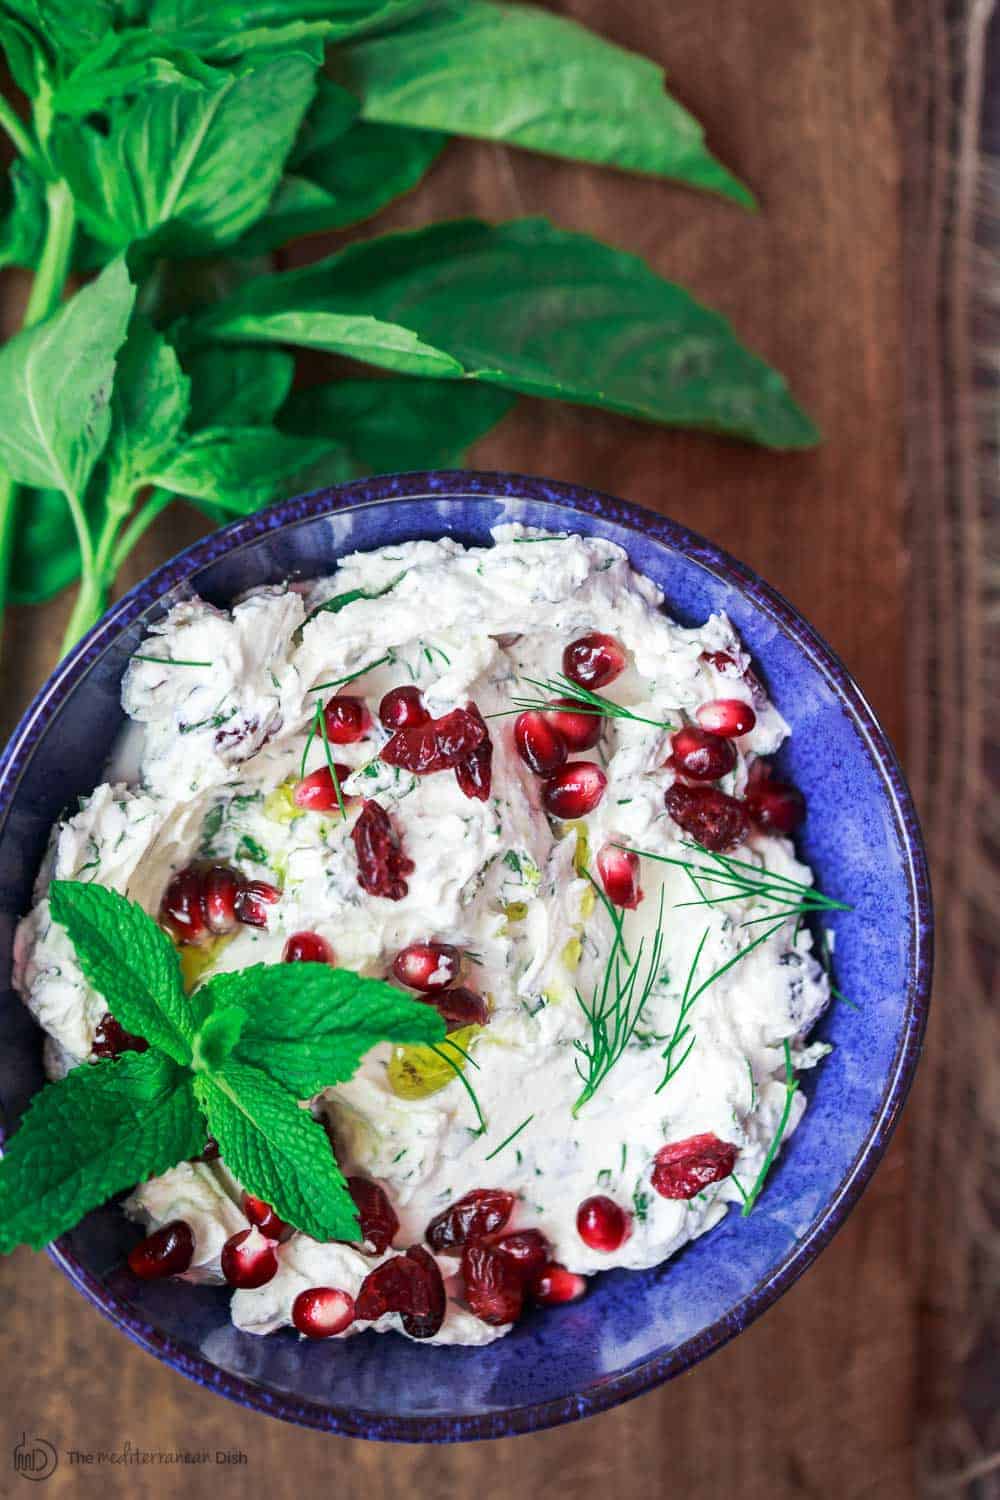 Labneh garnished with pomegranate seeds and fresh mint